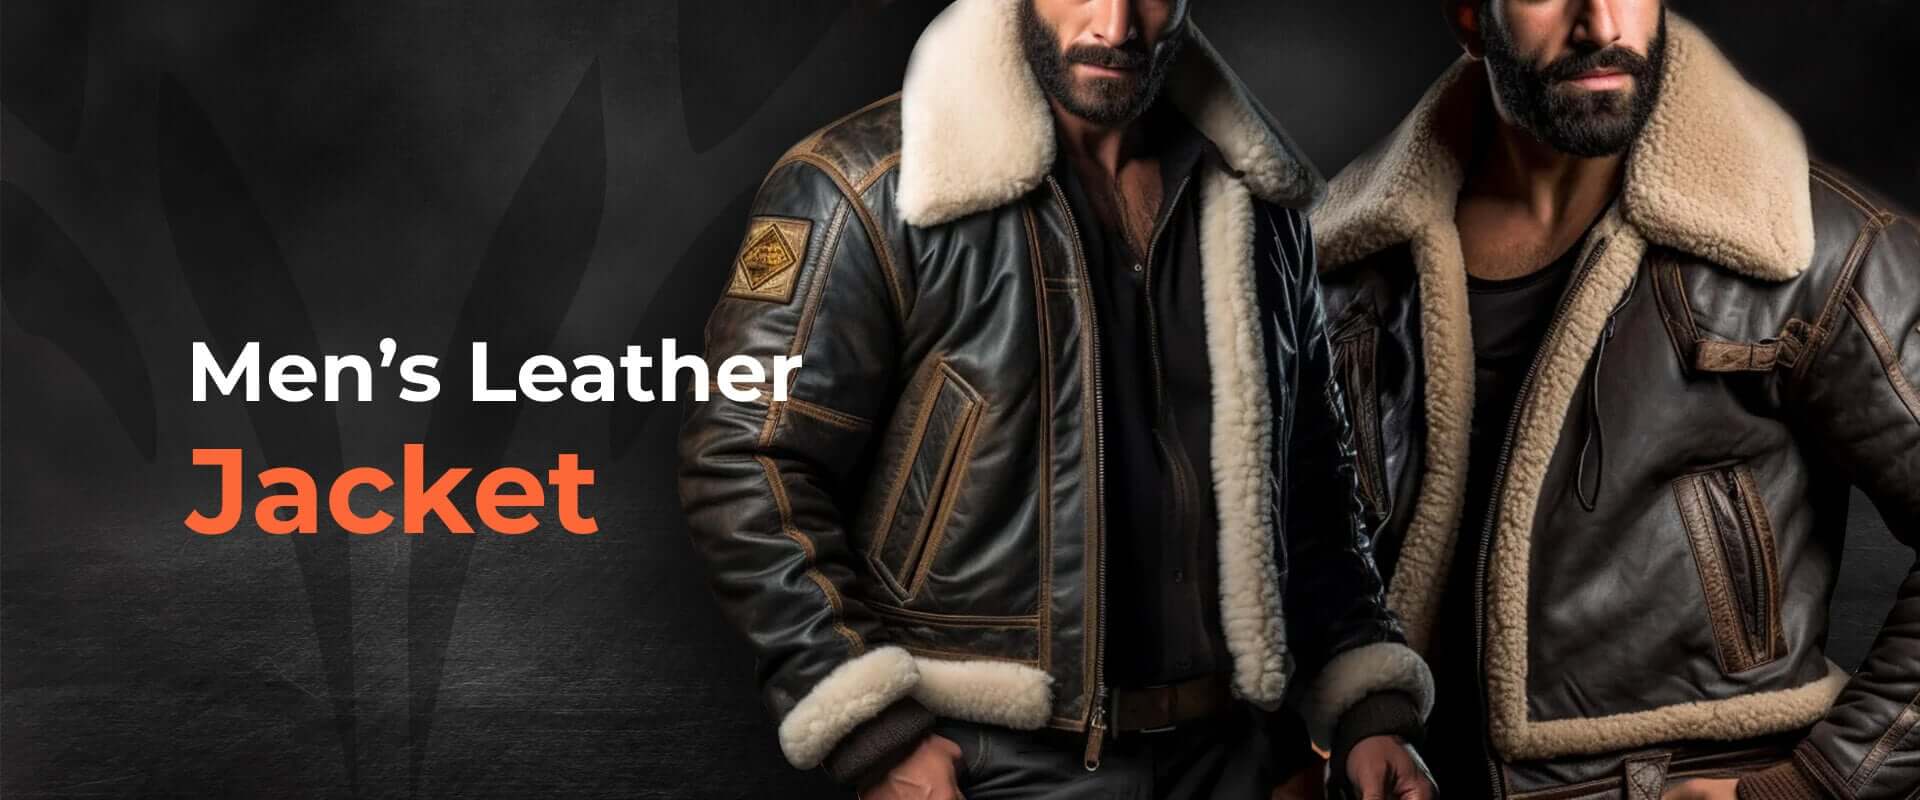 Shearling Leather Jacket For Men And Women USA